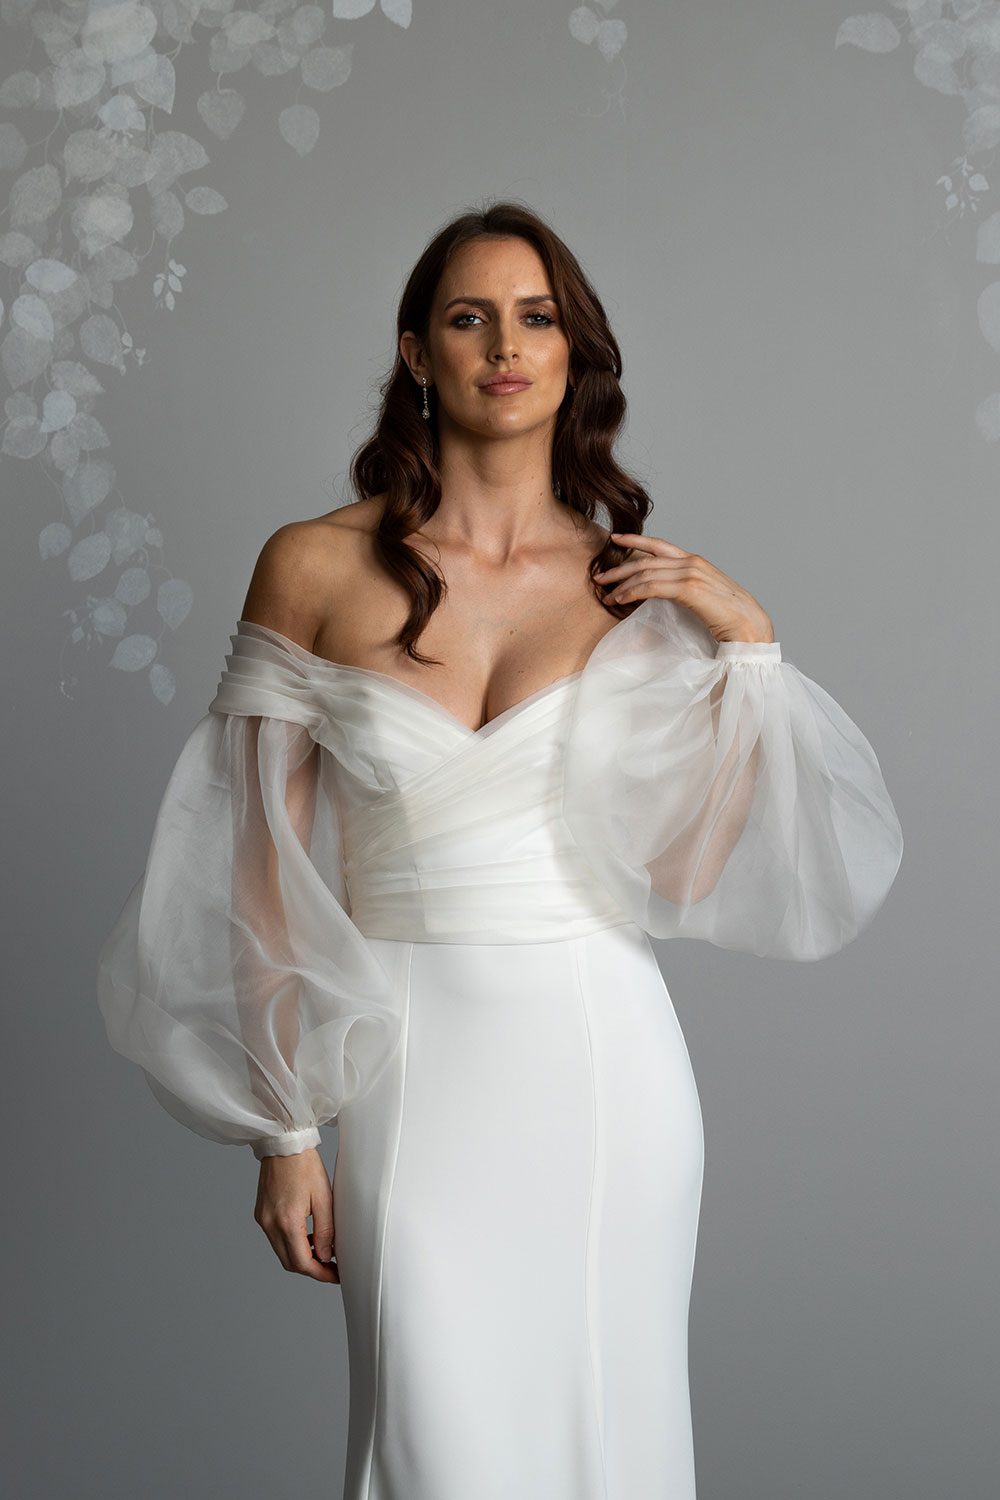 Marilyn Wedding Dress by Vinka Design - . Featuring a sculptured, fitted bodice with a sweetheart neckline that flows seamlessly into beautiful off shoulder detail that dips into a V-shaped back. For added drama, we have paired our Marilyn gown with detachable silk organza sleeves that taper at the wrist with delicate, self-covered silk buttons. Model with hand to shoulder and looking forward wearing organza detachable statement sleeves over timeless design gown